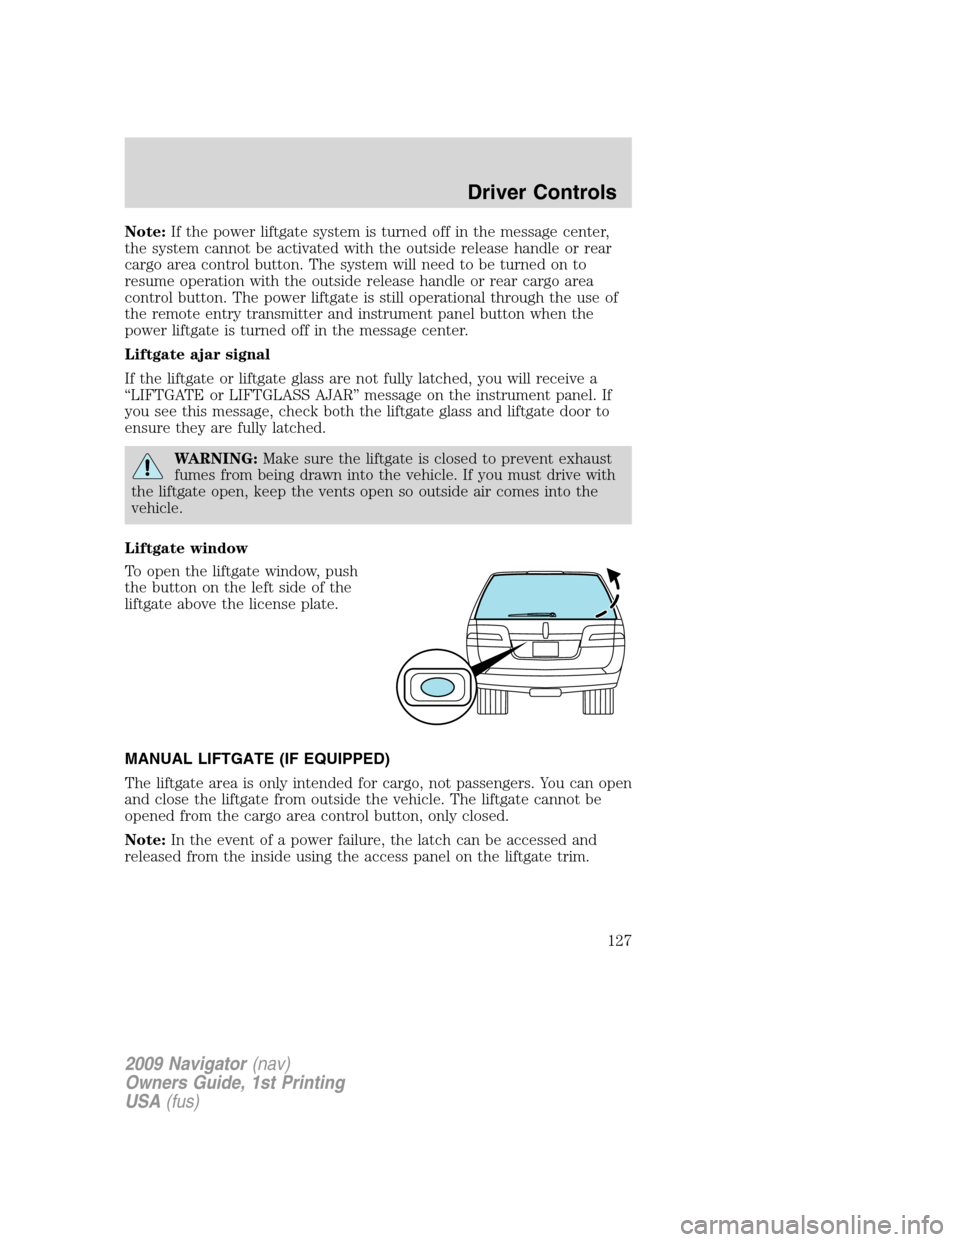 LINCOLN NAVIGATOR 2009 User Guide Note:If the power liftgate system is turned off in the message center,
the system cannot be activated with the outside release handle or rear
cargo area control button. The system will need to be turn